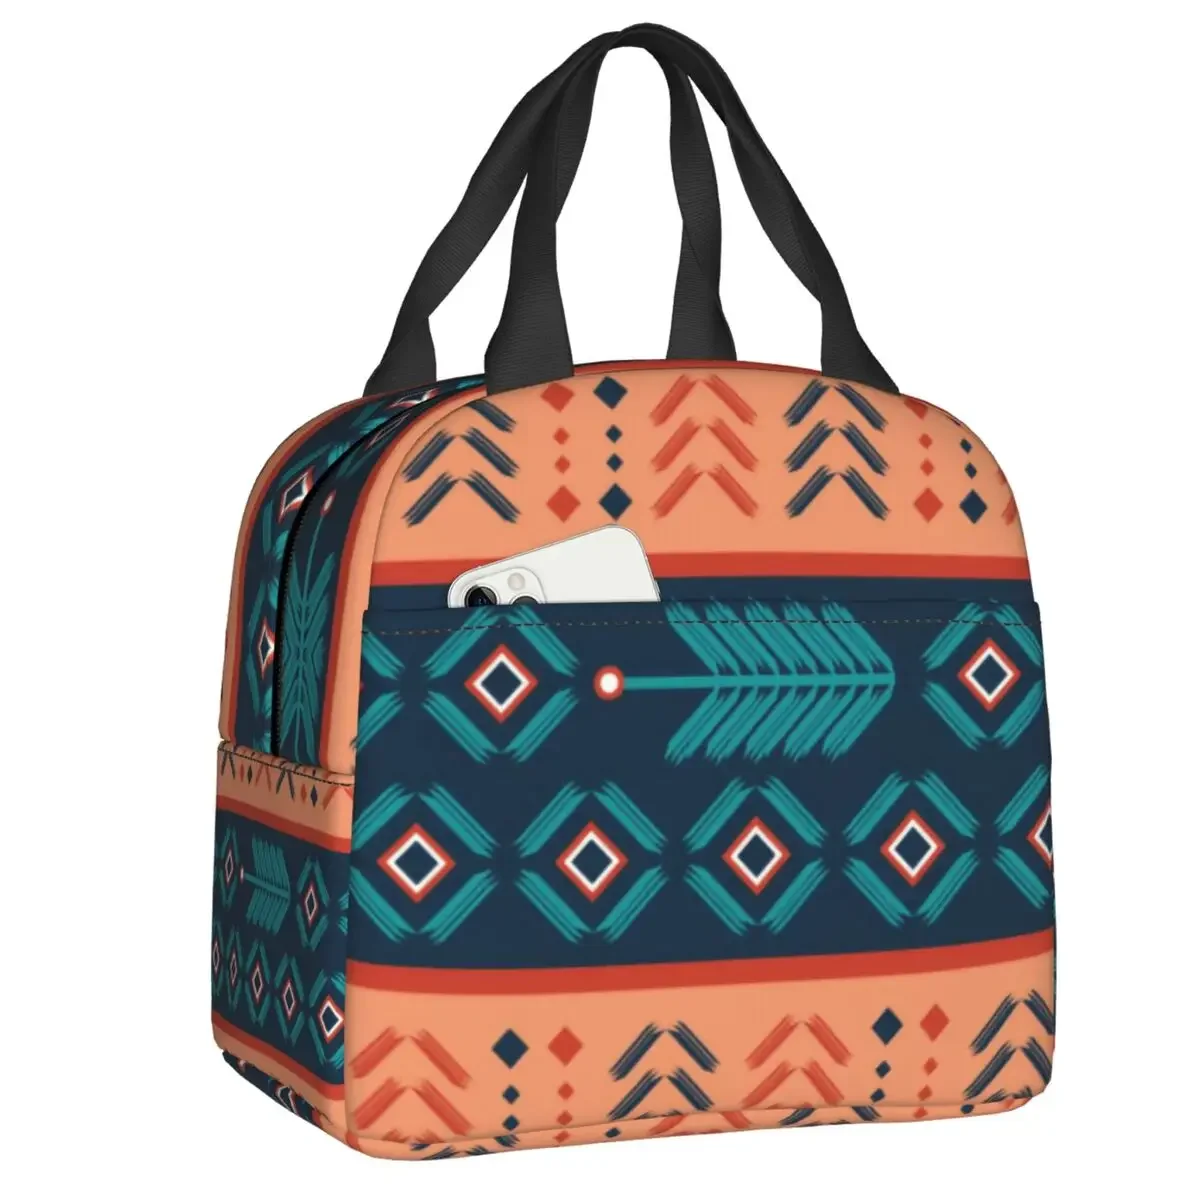 

Colorful Tribal Bohemian Pattern Insulated Lunch Bag for Women Portable Boho Thermal Cooler Bento Box Office Work School